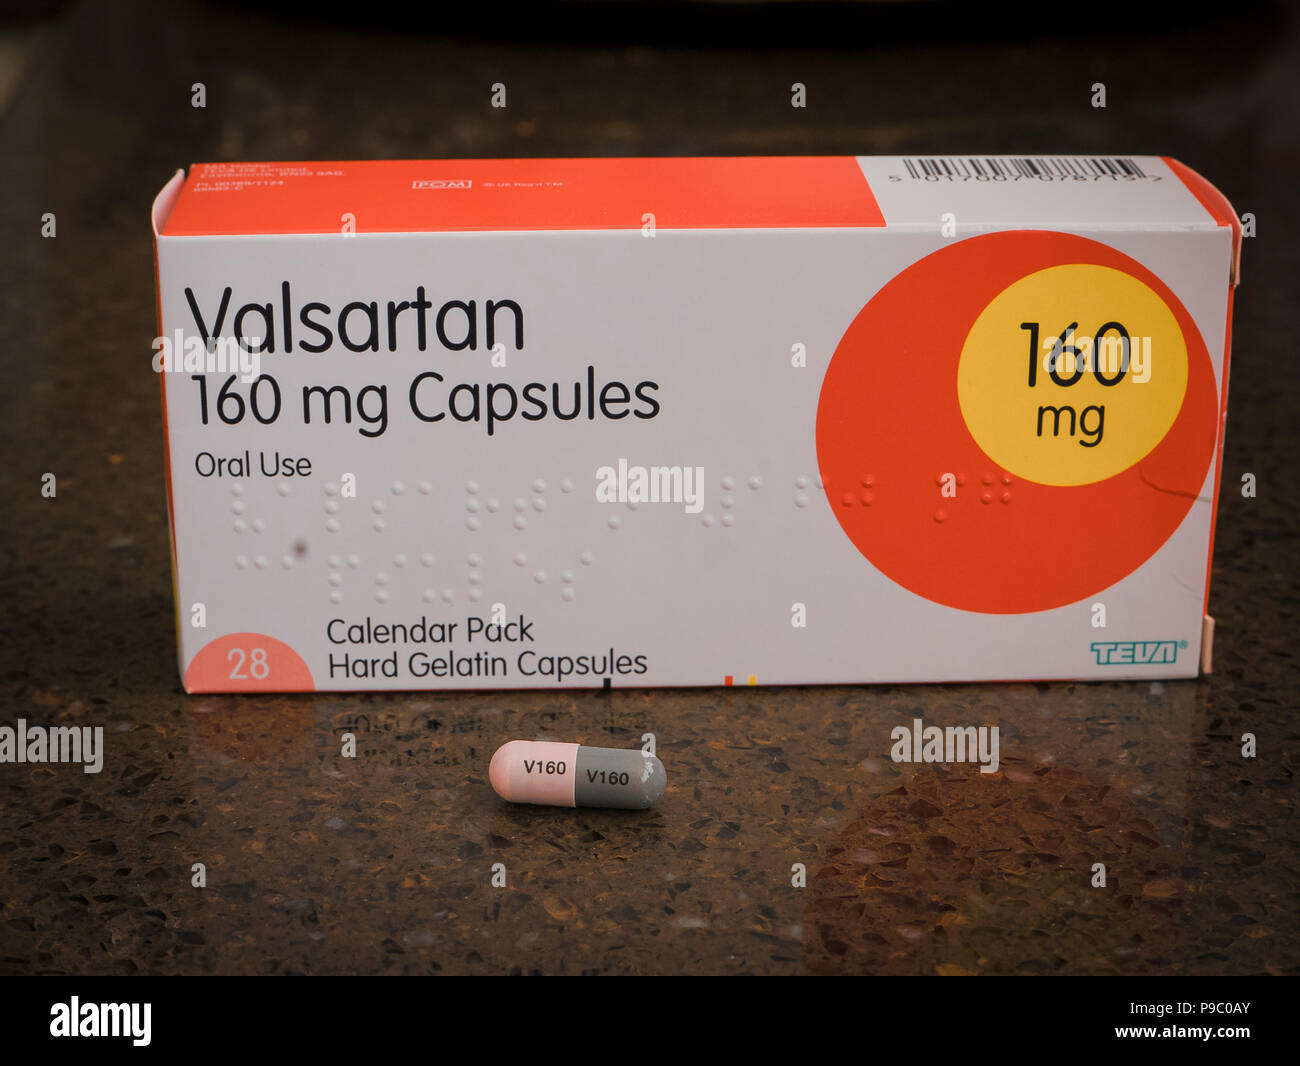 Packet of Valsartin 160 mg capsules showing a single dose of the medicine to control blood pressure in adult patients in UK Stock Photo